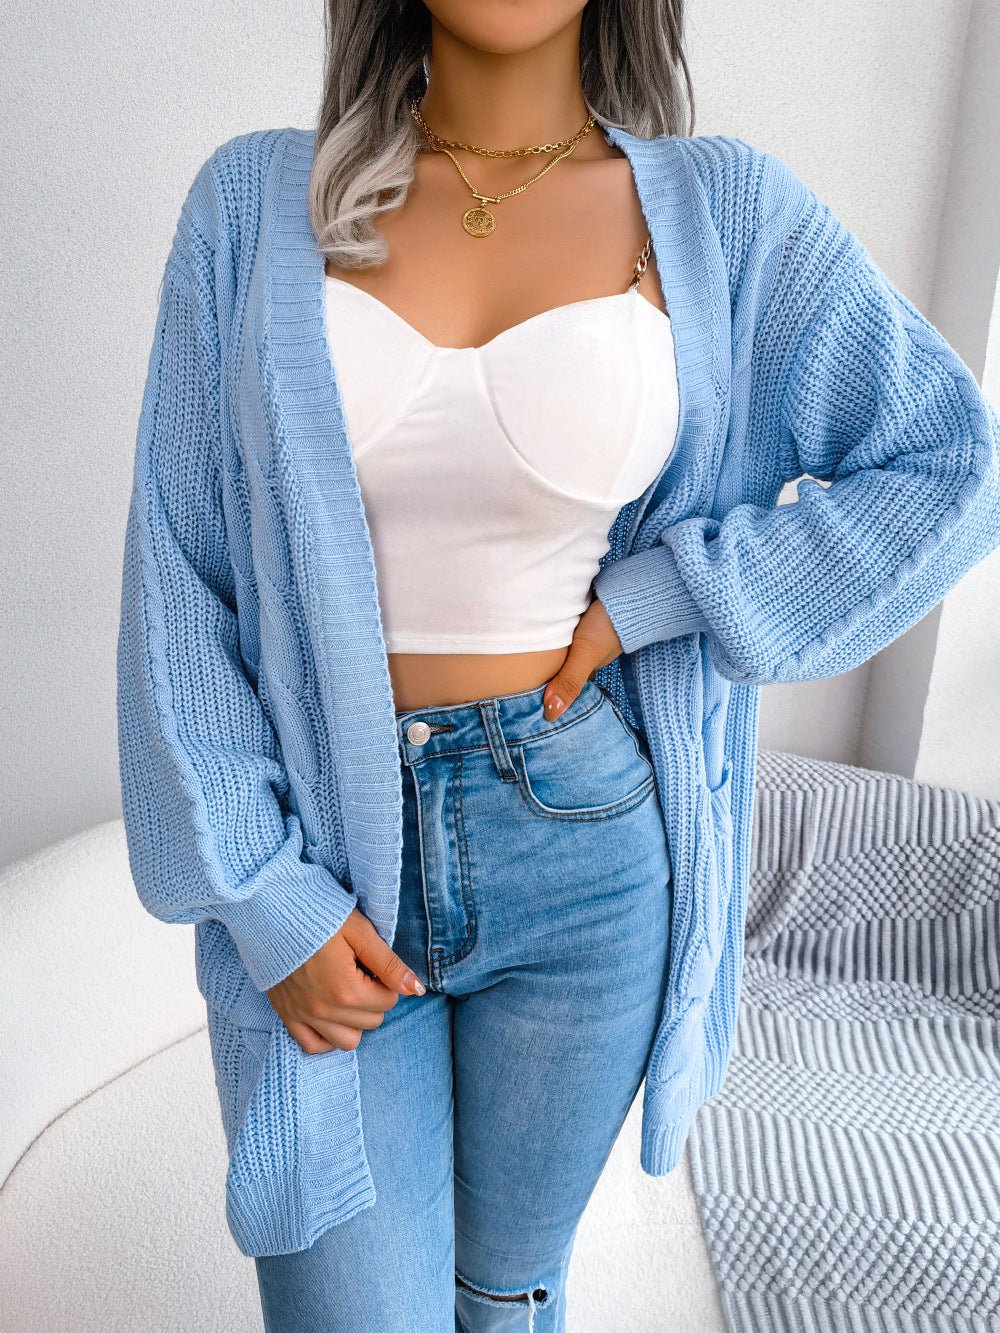 Trendsi Cupid Beauty Supplies Sky Blue / S Woman Cardigan Cable-Knit Open Front Pocketed Cardigan